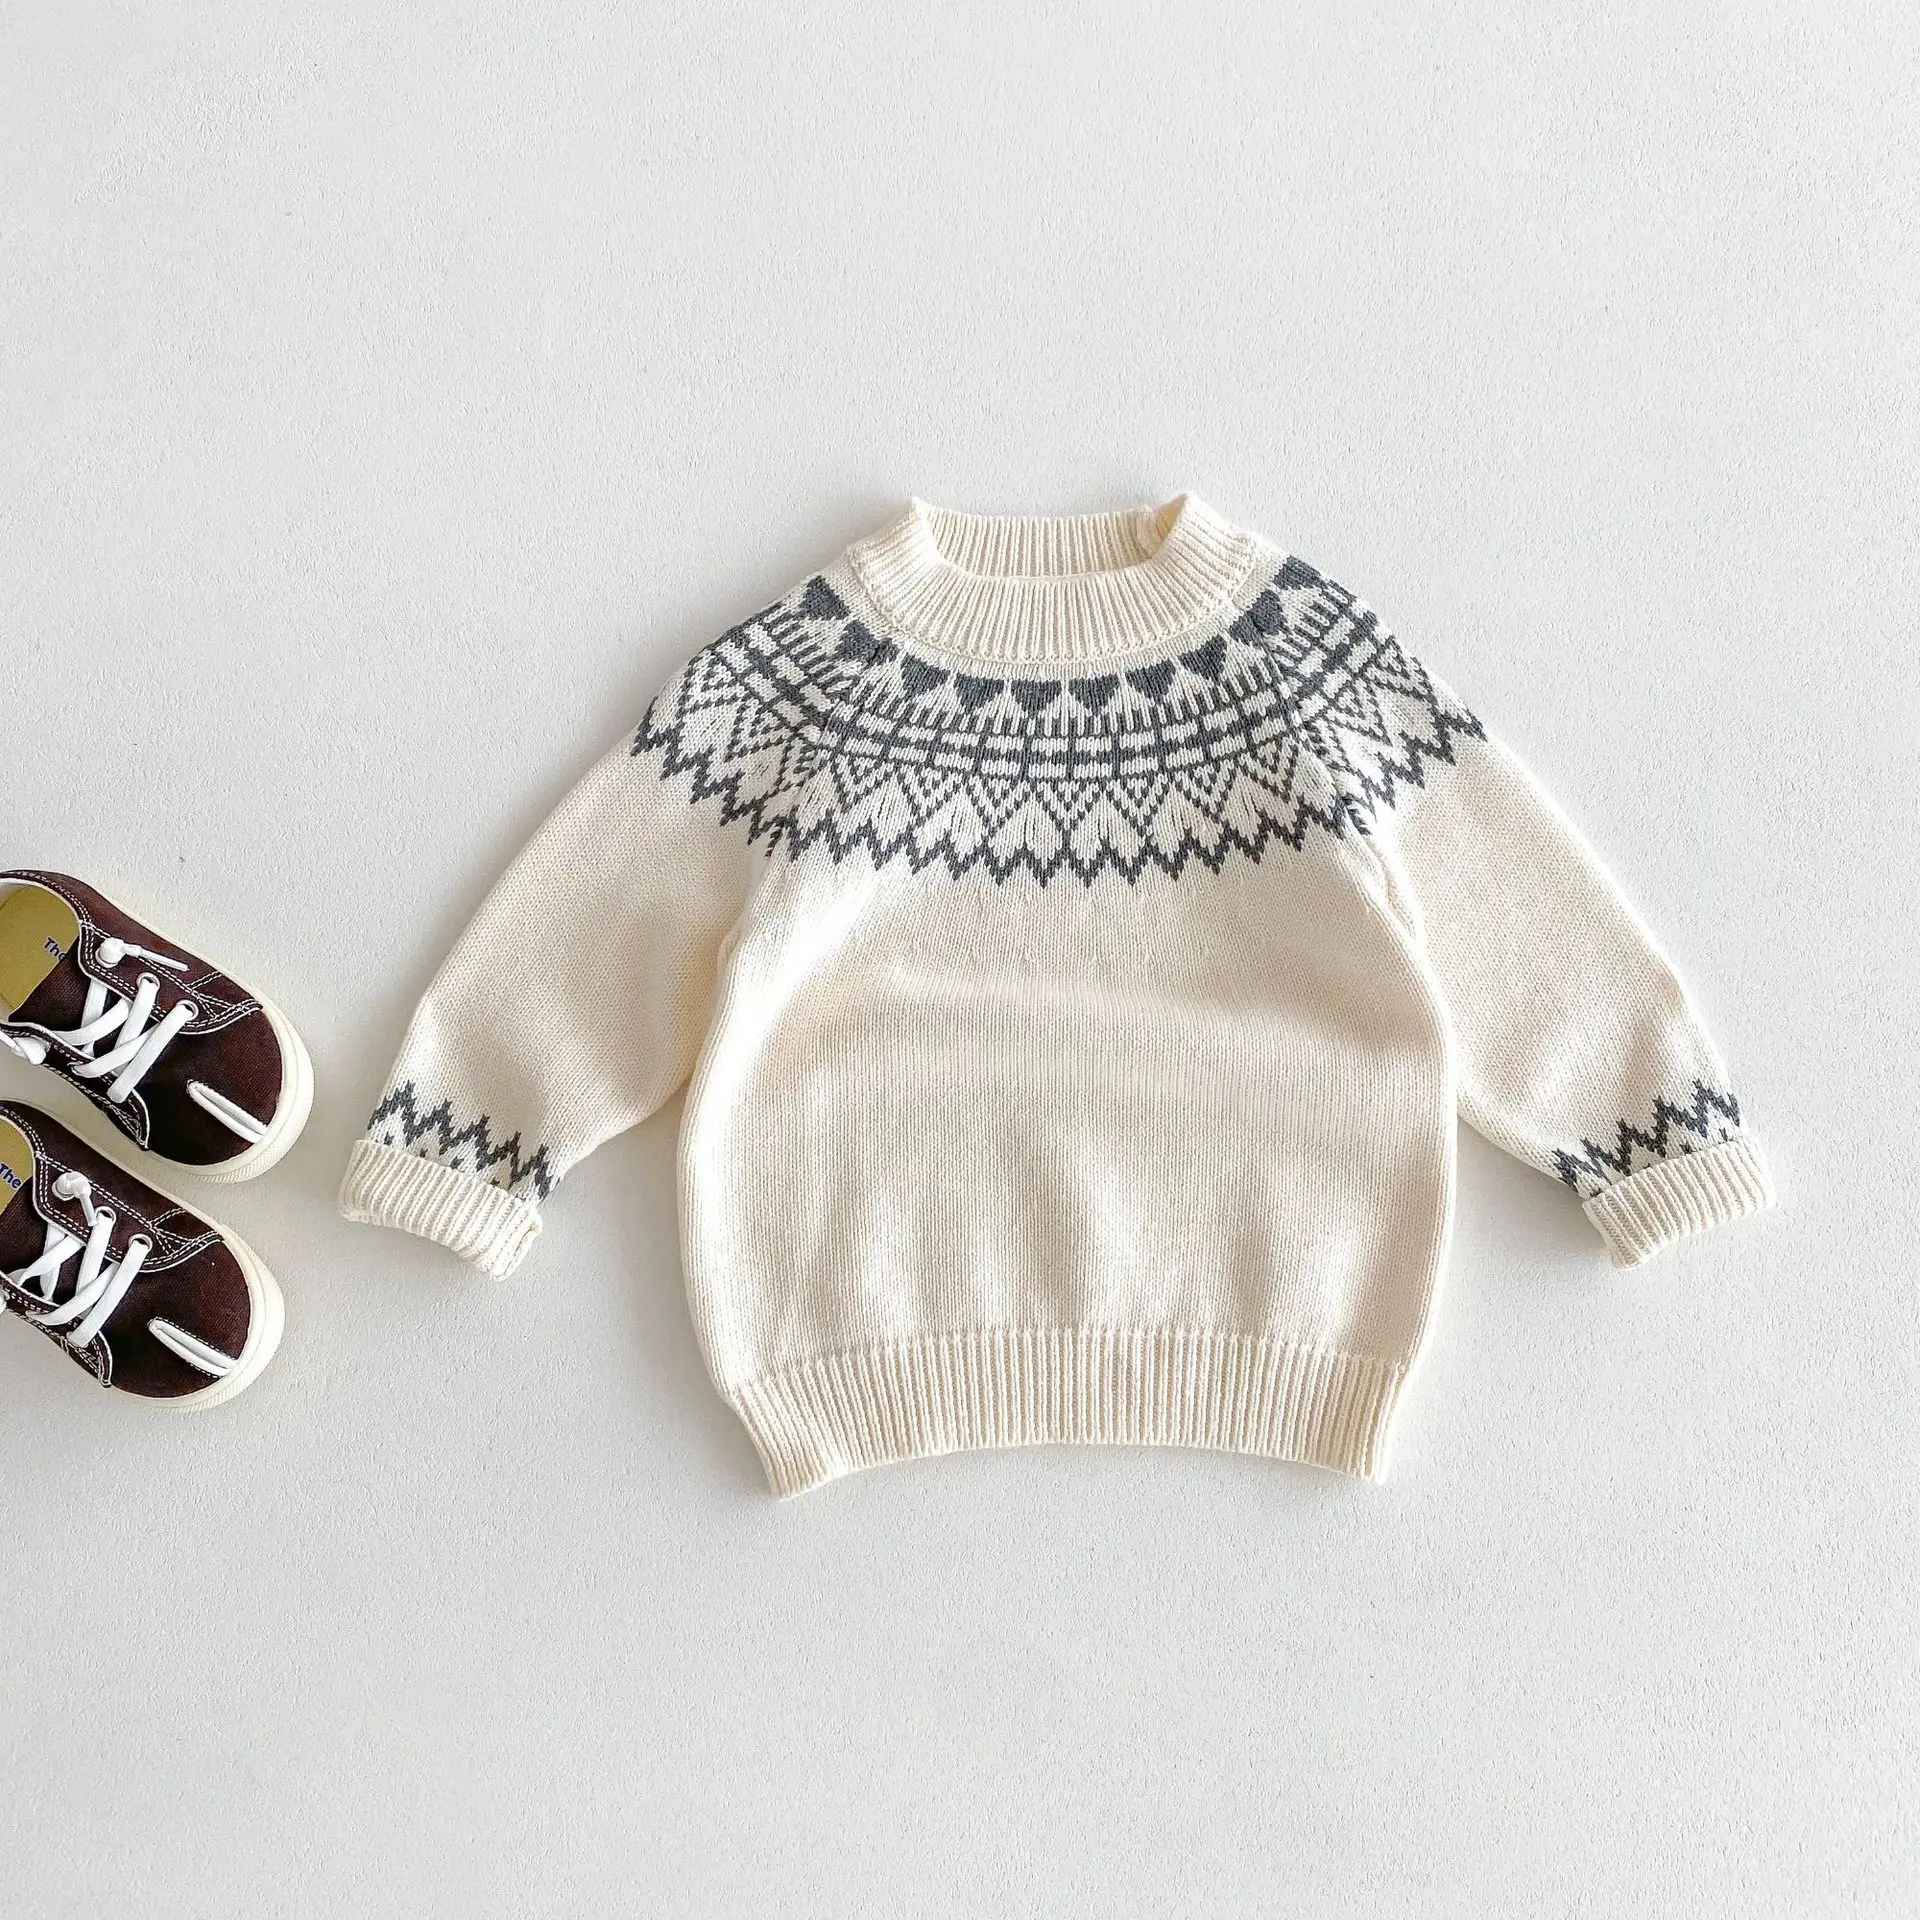 

Autumn New Children Sweater Boys Girls Jacquard Knitwear Fashion Versatile Toddler Baby Casual Knitted Pullover Kids Clothes